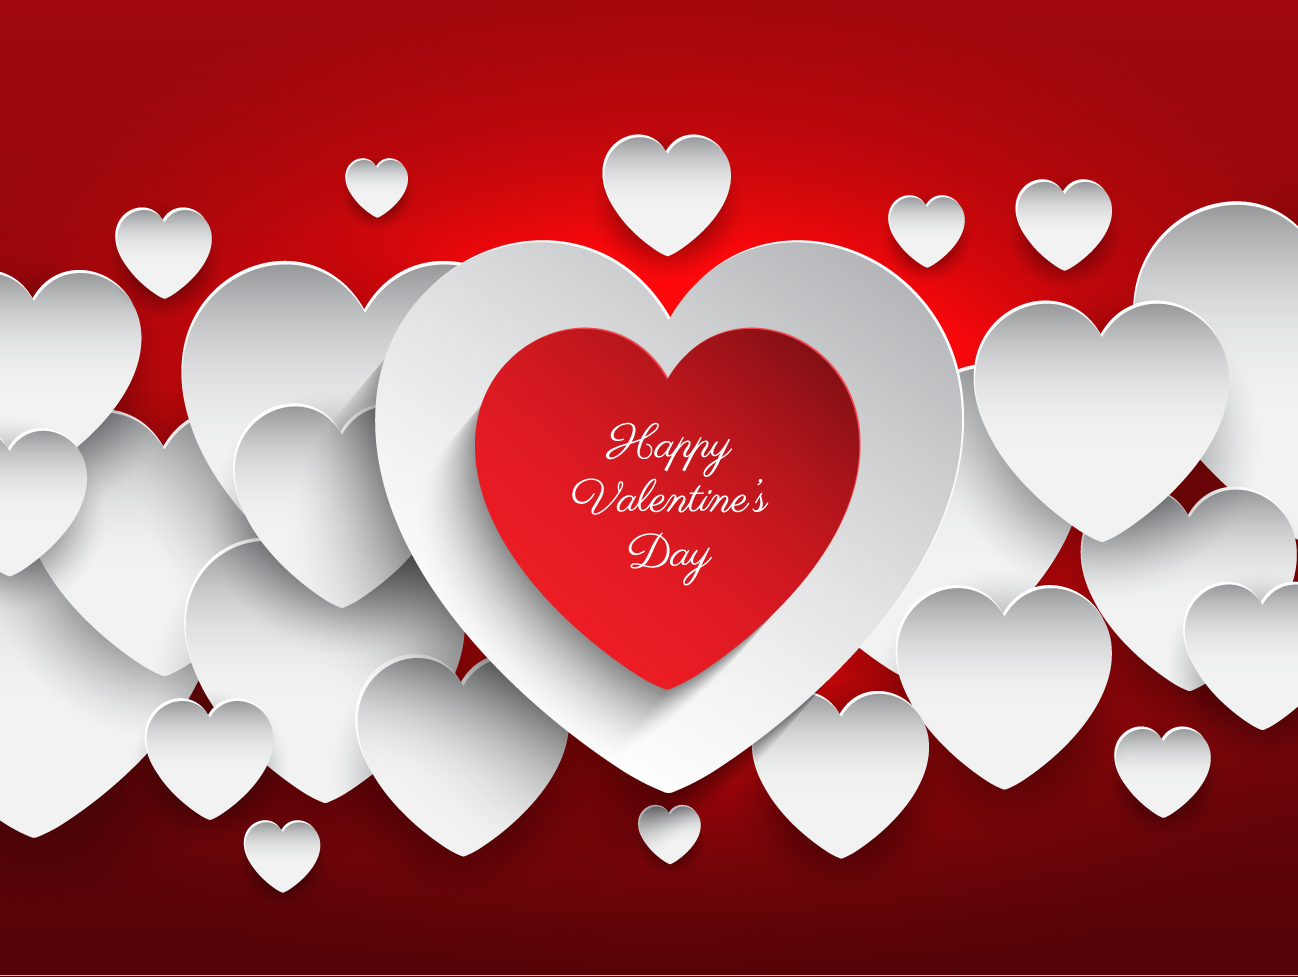 Cute Valentines Day Pictures In HD Hug2love